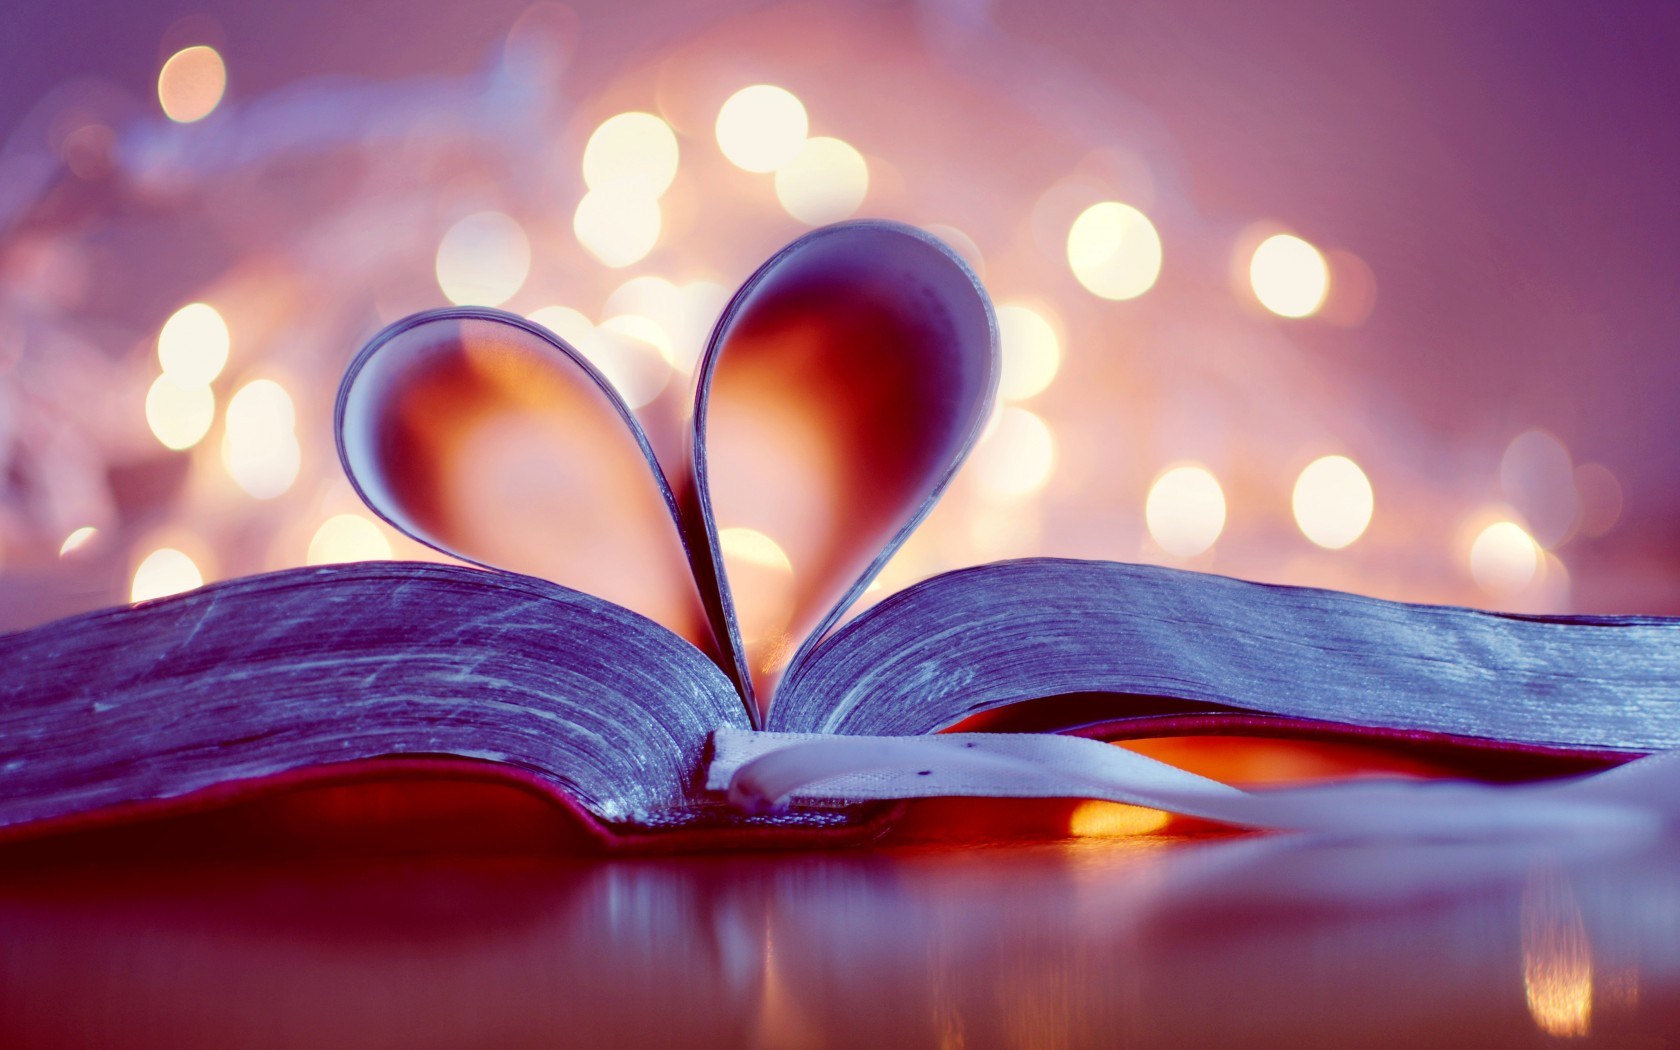 Beautiful Love Heart On The Book Wallpaper HD With